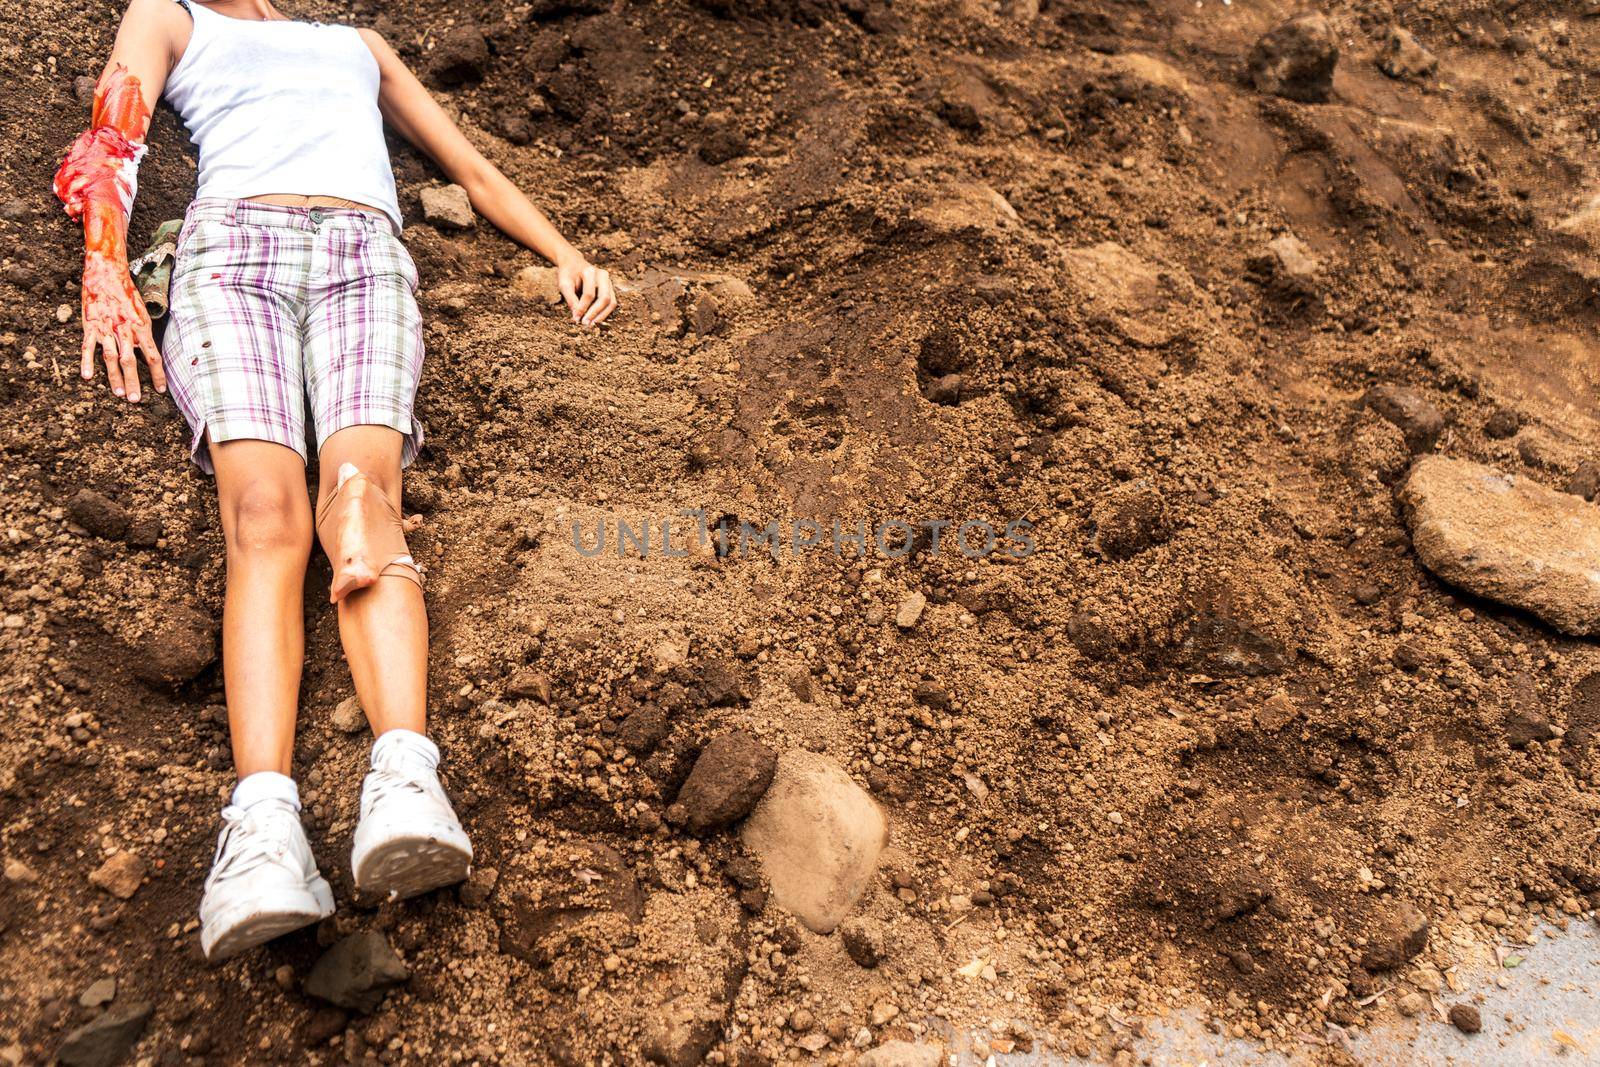 Horizontal photo of an unrecognizable young Latin woman victim of femicide lying on a pile of dirt